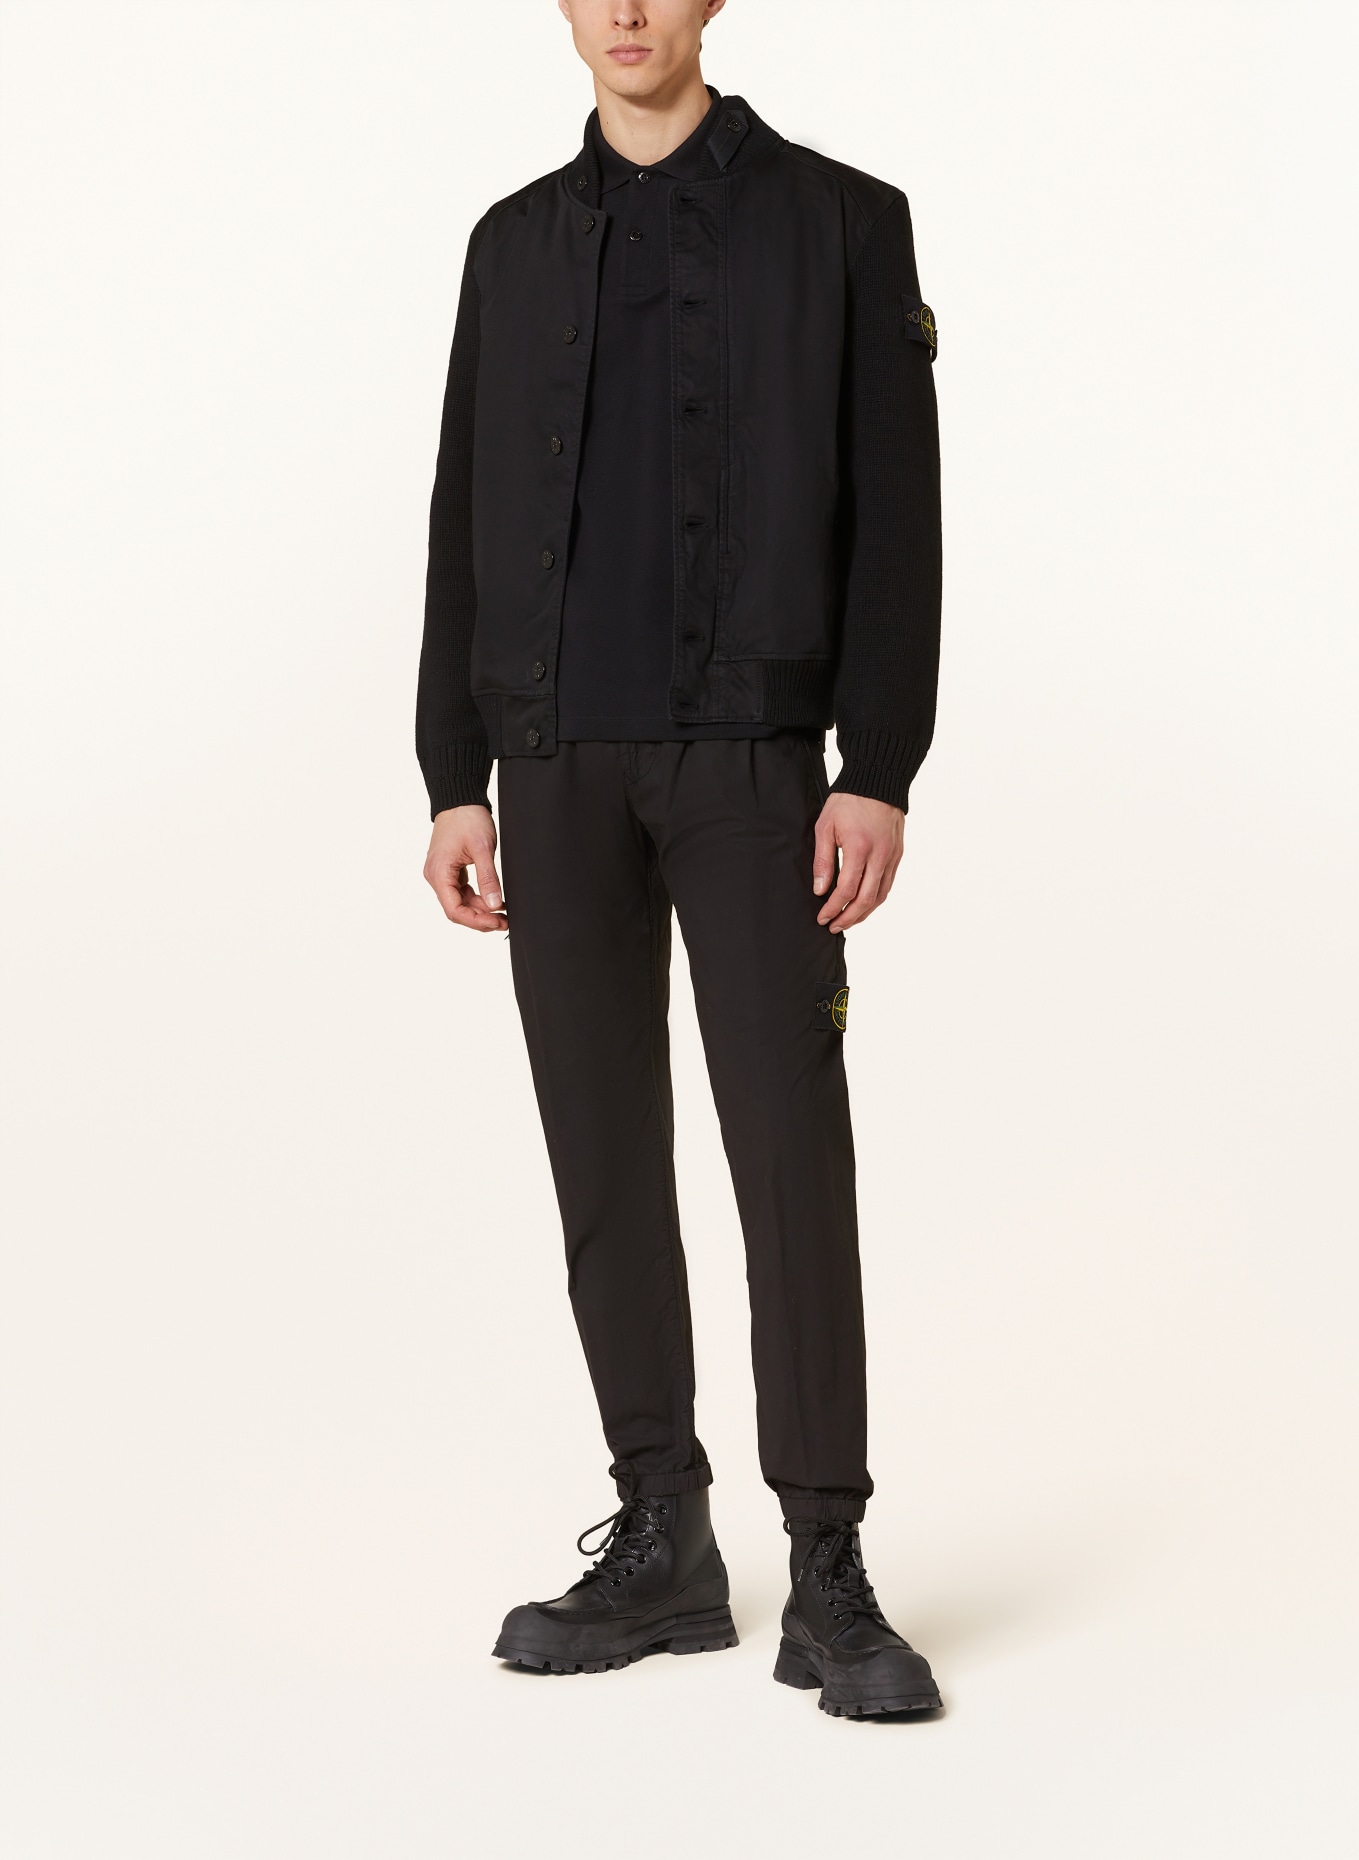 STONE ISLAND Bomber jacket in mixed materials, Color: BLACK (Image 2)